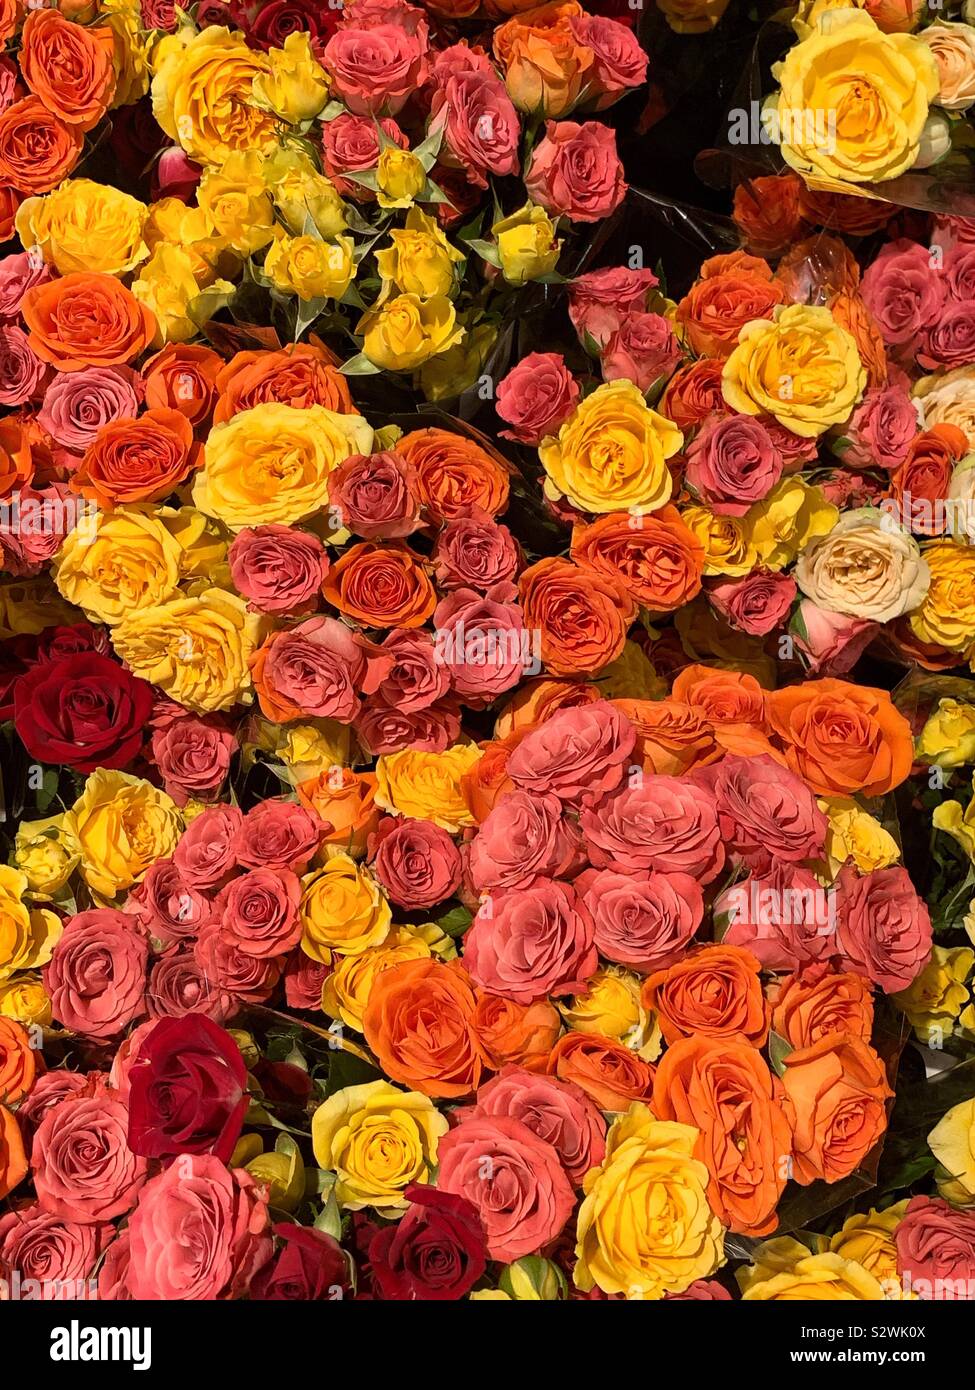 Many bouquets of fresh pink, yellow, and red roses. Stock Photo